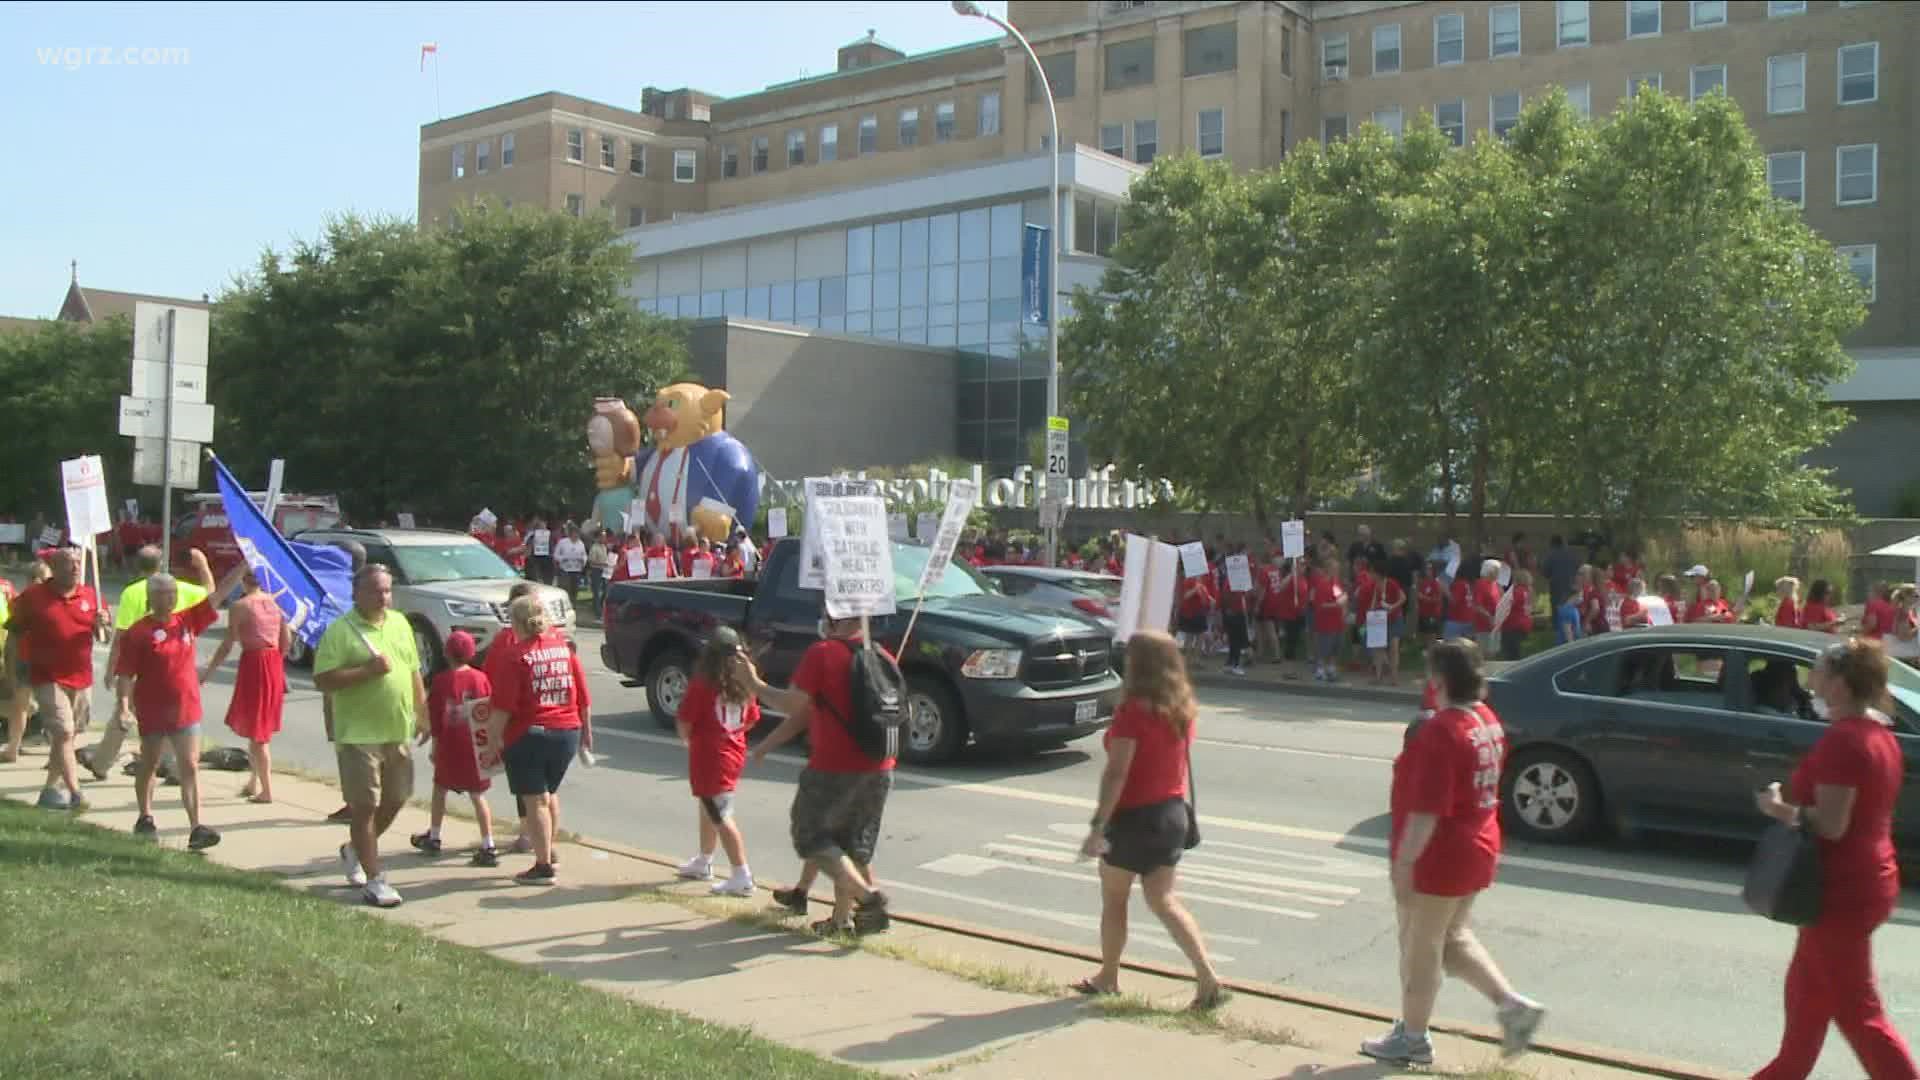 Workers held an information picket Wednesday afternoon, contending the hospital system is not negotiating in good faith.